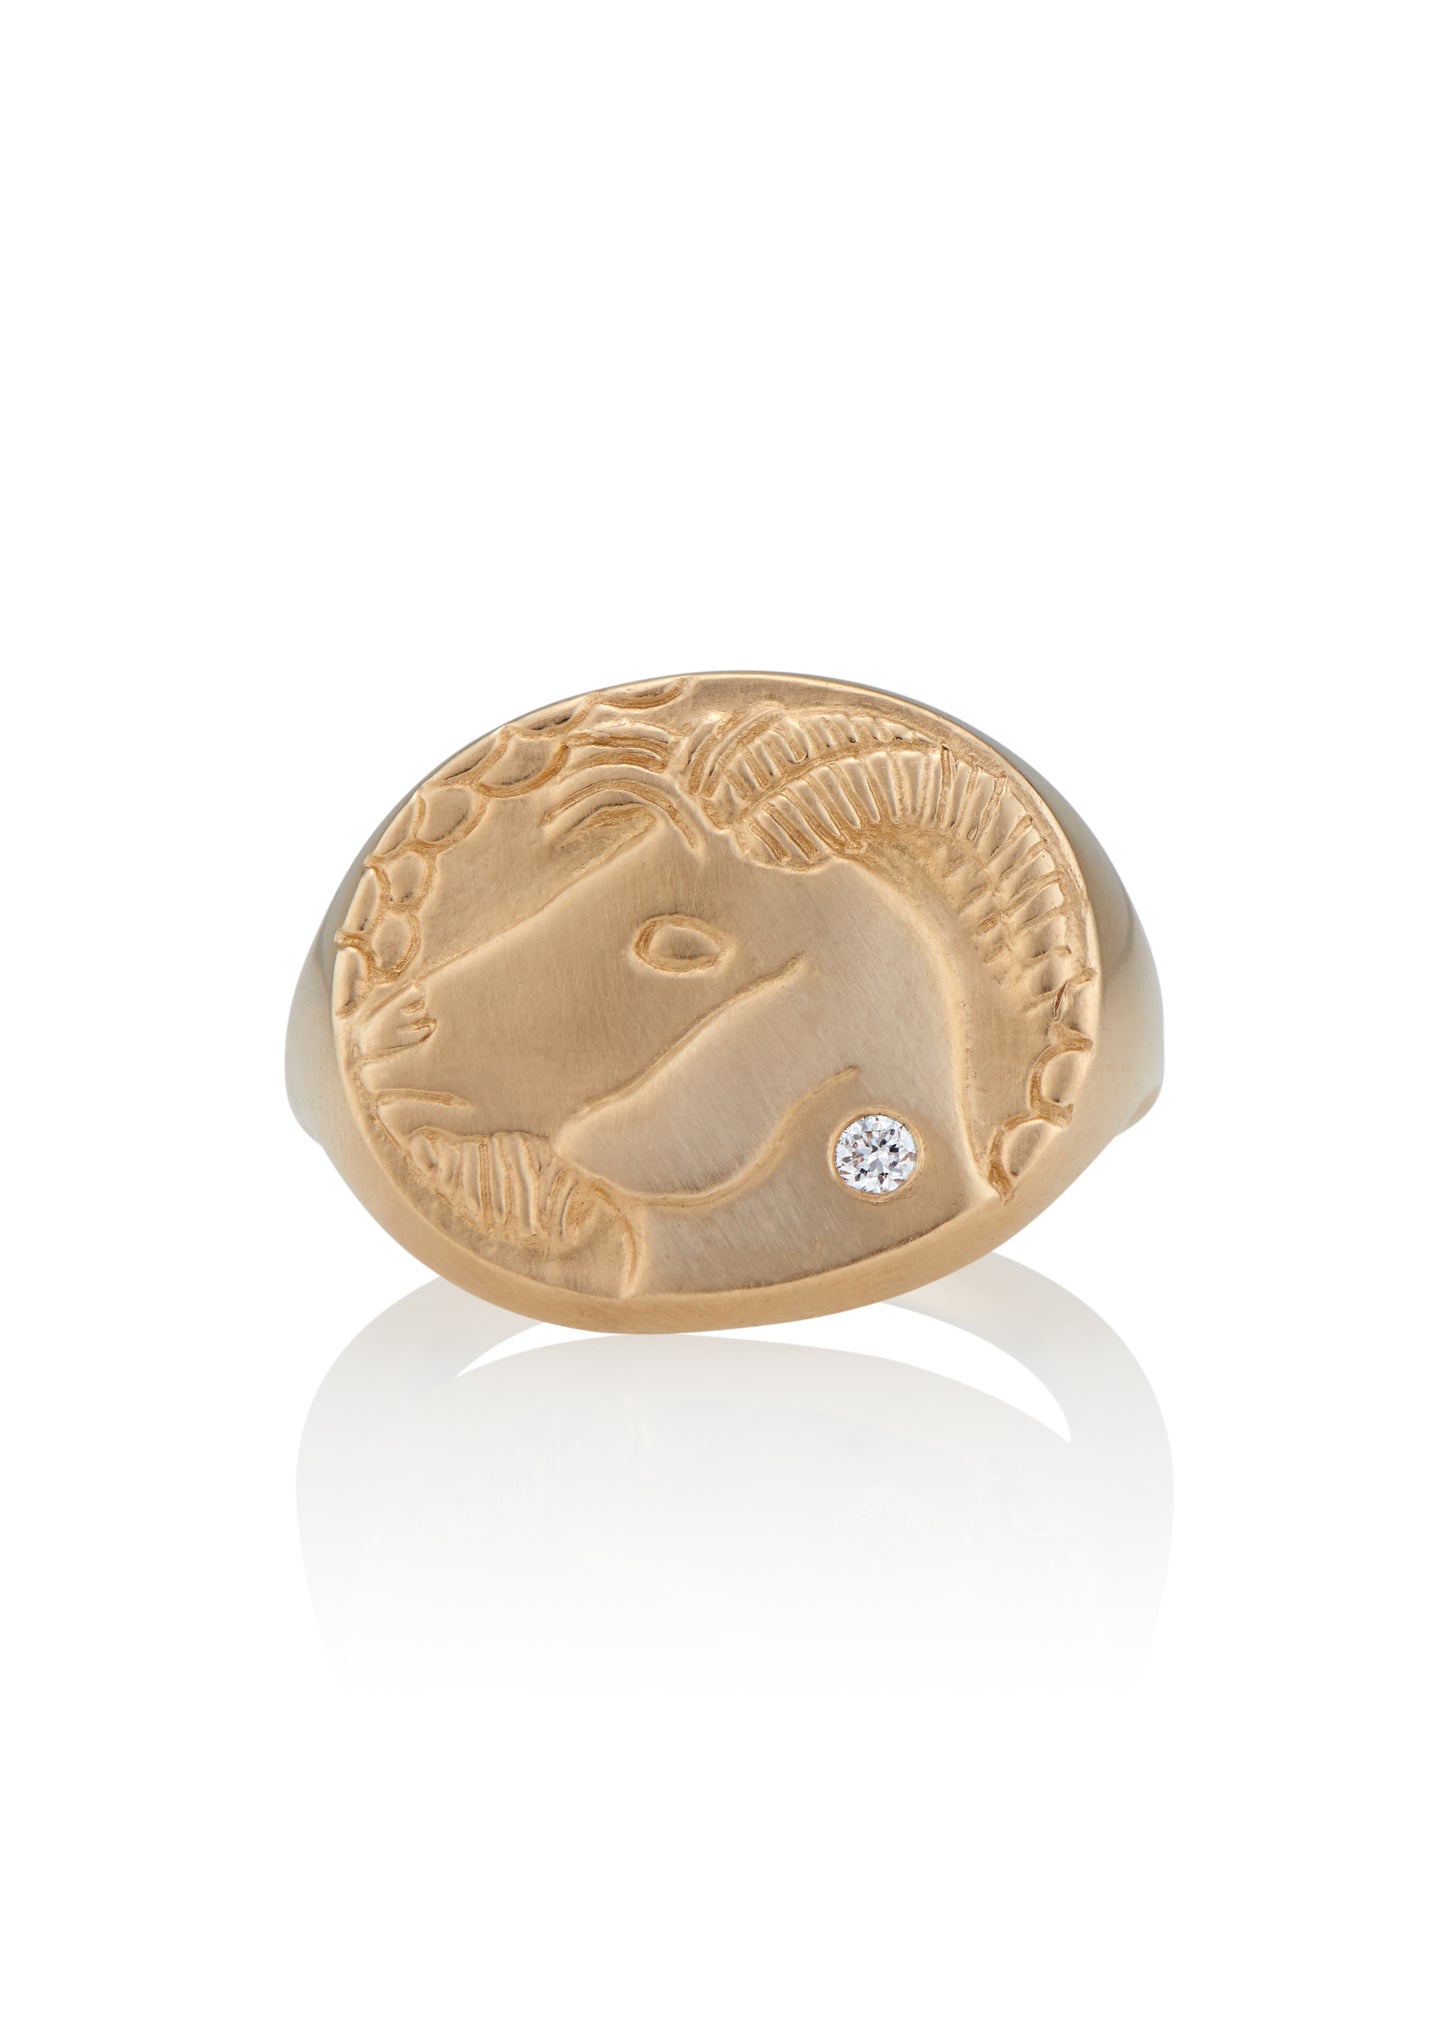 The tenth sign of the Zodiac, Earth sign Capricorn is fiercely independent and responsible, grounded in reality that they can mold to their will. A hand-carved, moody bearded goat is accented with a precious diamond for a ring that captures the power of the celestial sky.